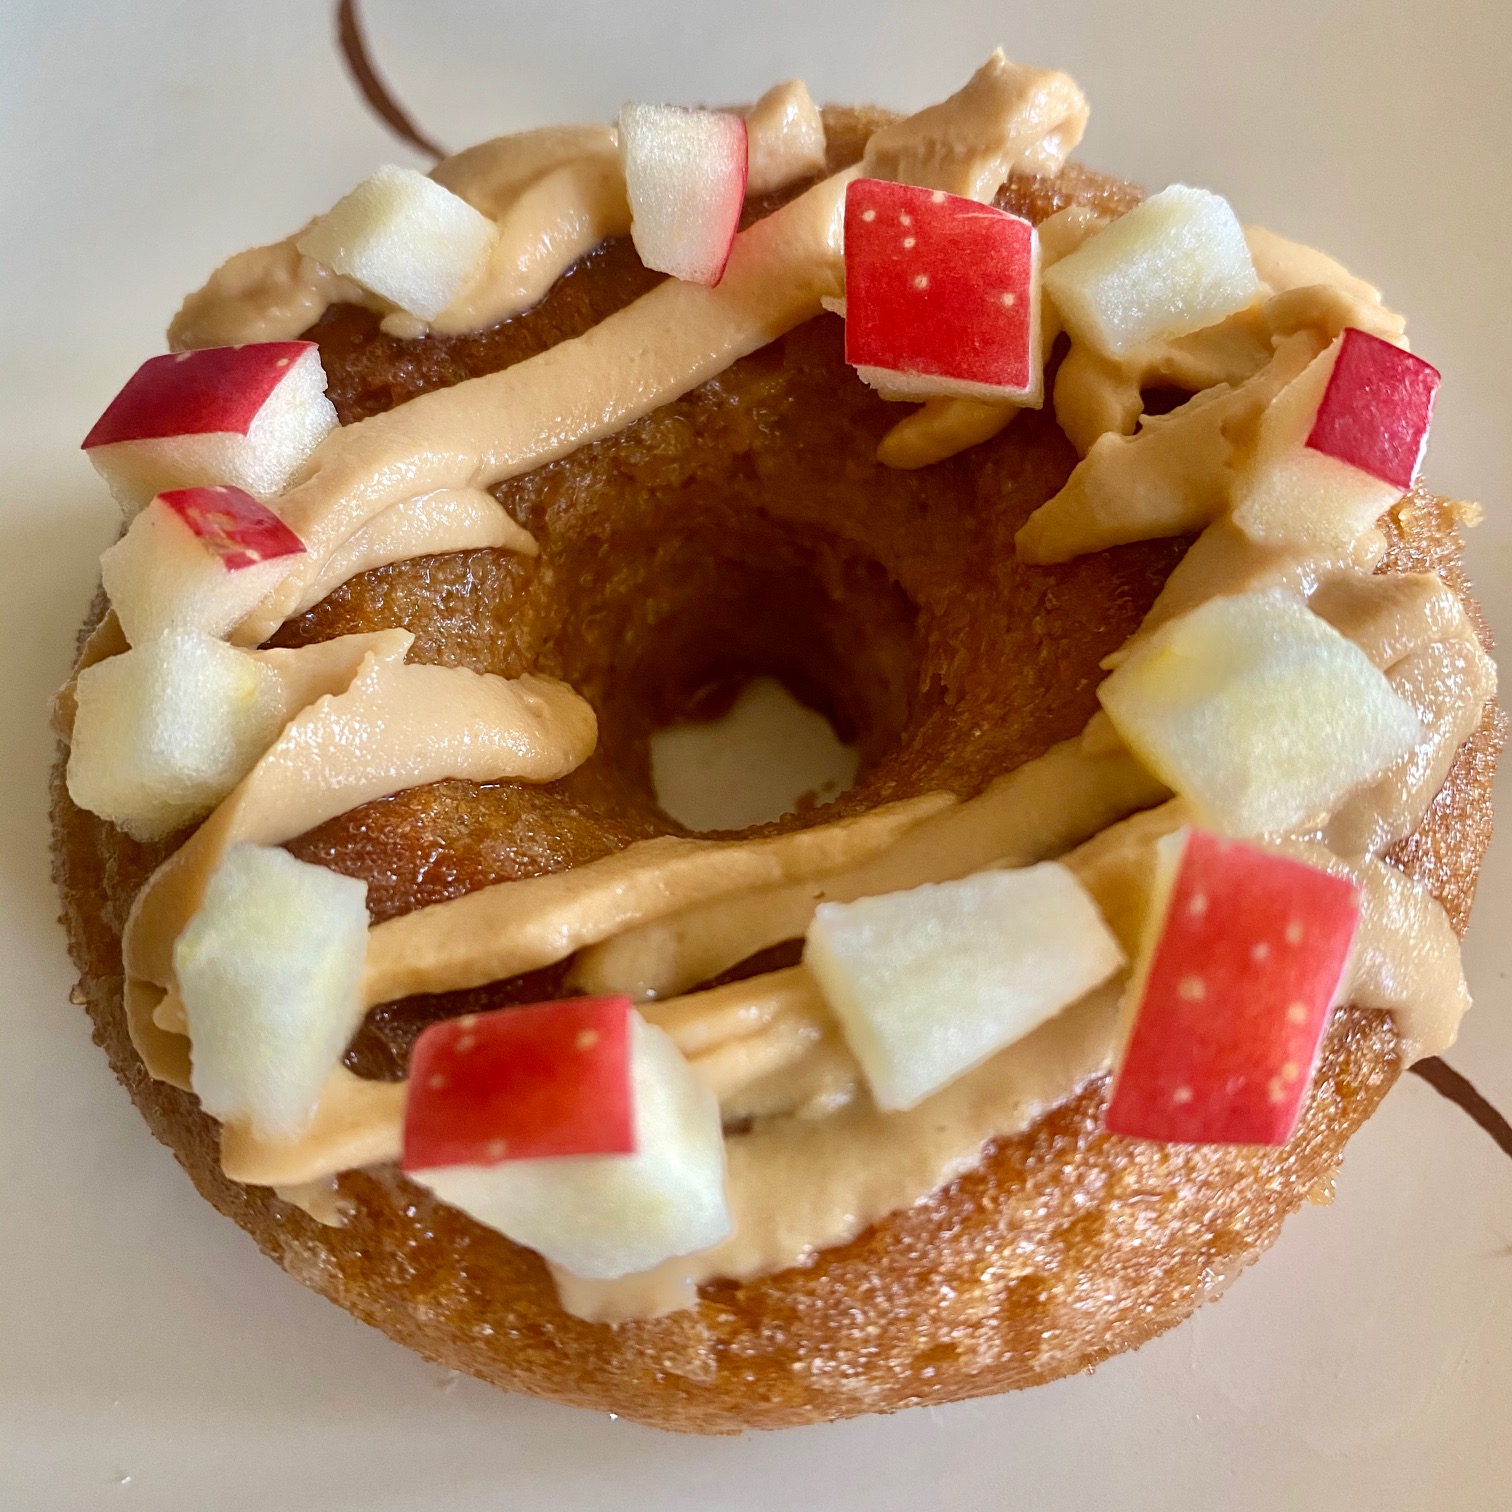 Salted Caramel Apple Donuts